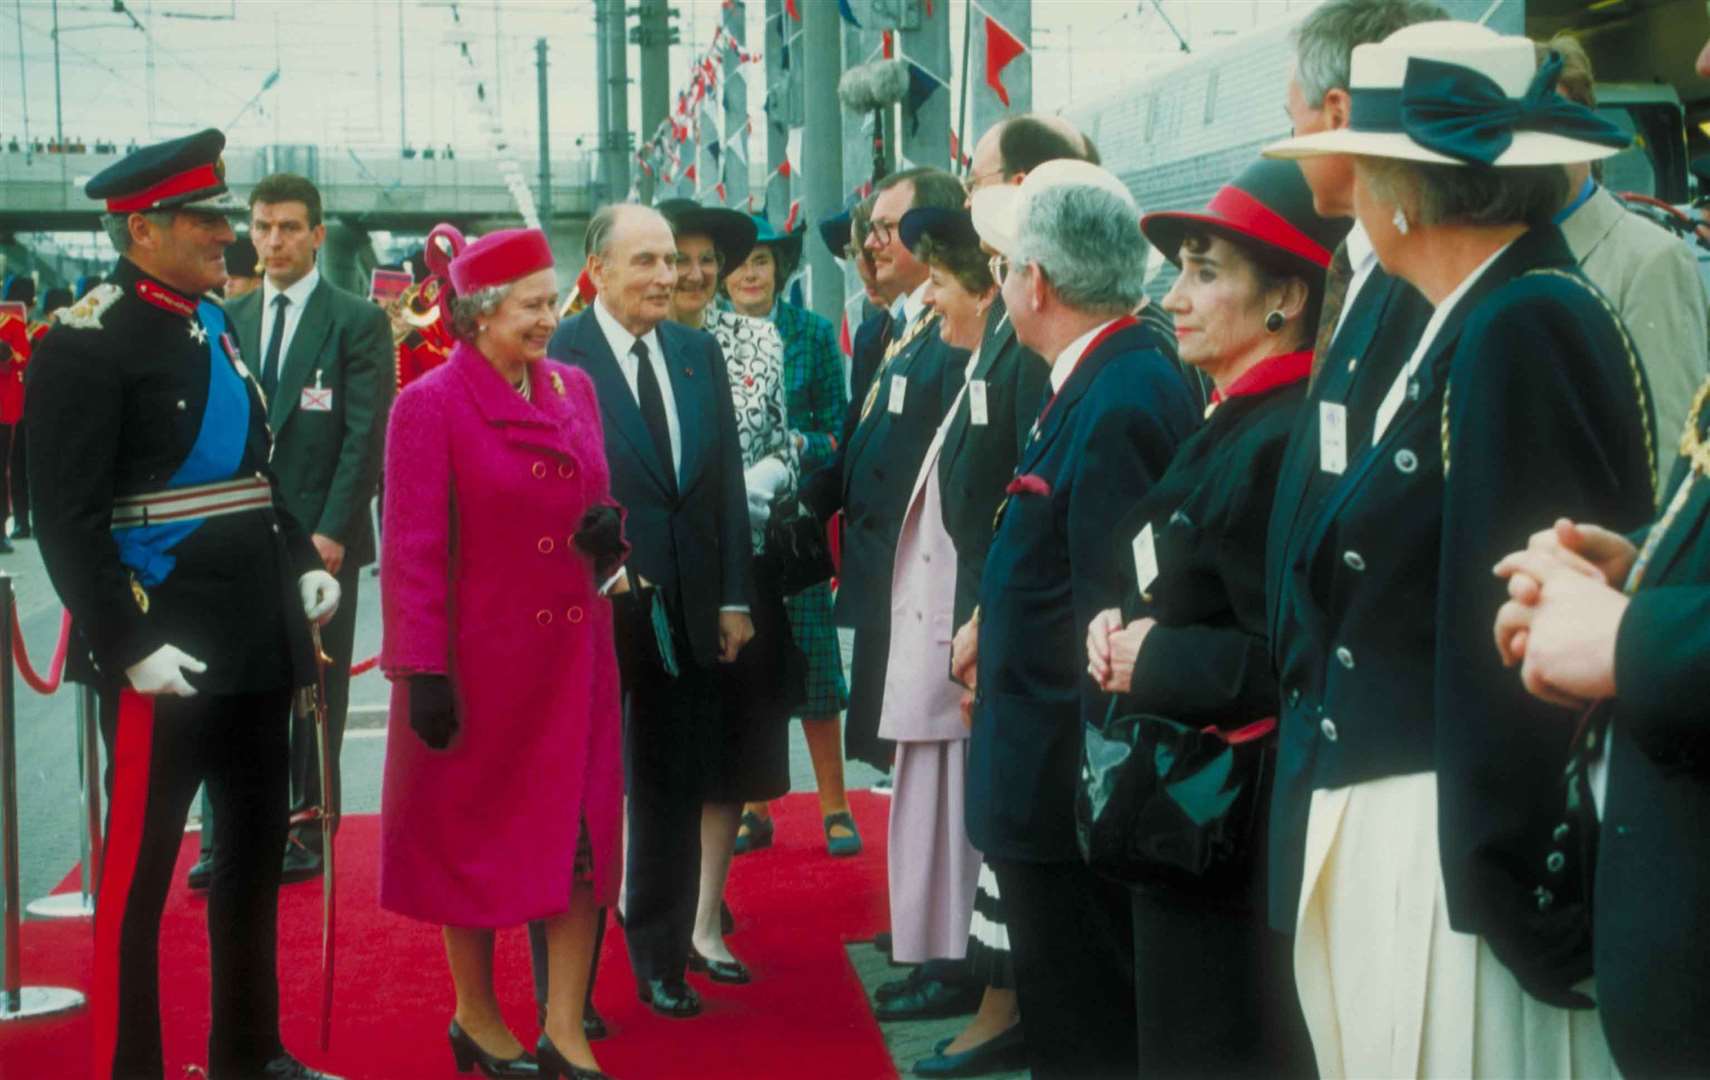 French President François Mitterrand and Queen Elizabeth II with dignitaries and guests at the opening of the Channel Tunnel in May 1994. Picture: Getlink